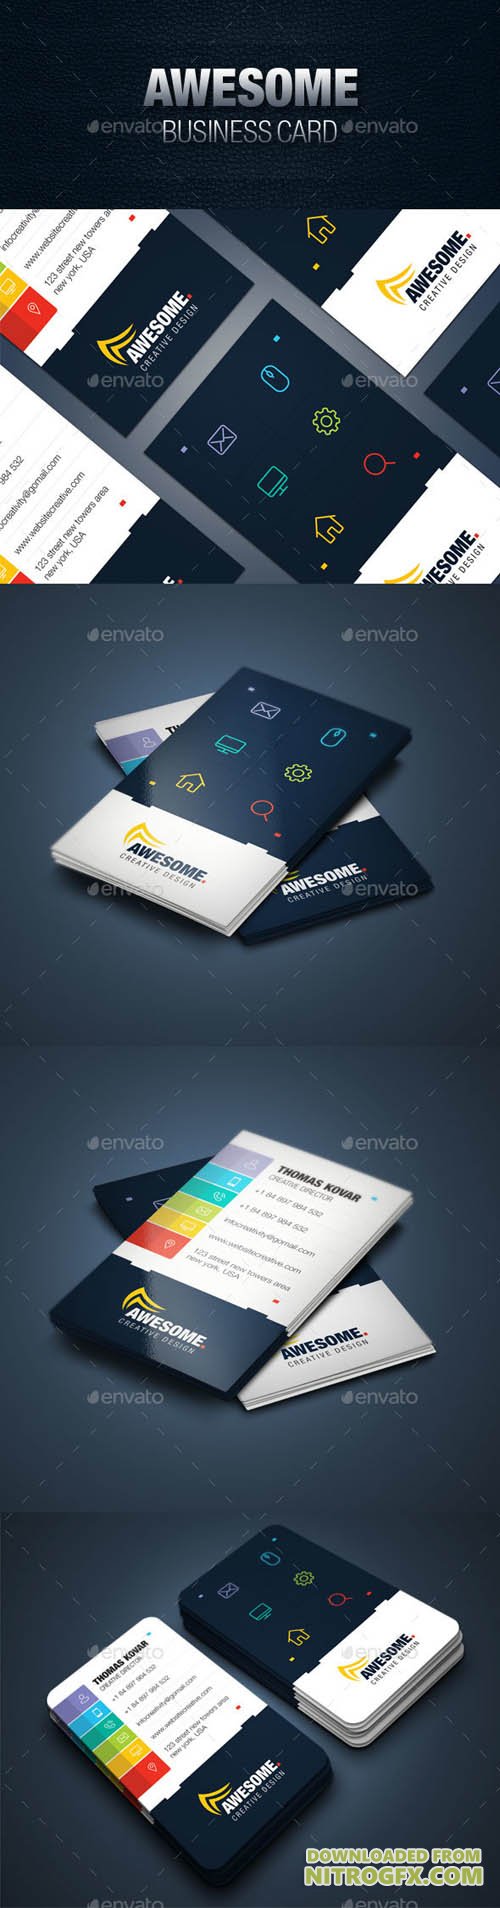 GraphicRiver - Business Card - 20621908